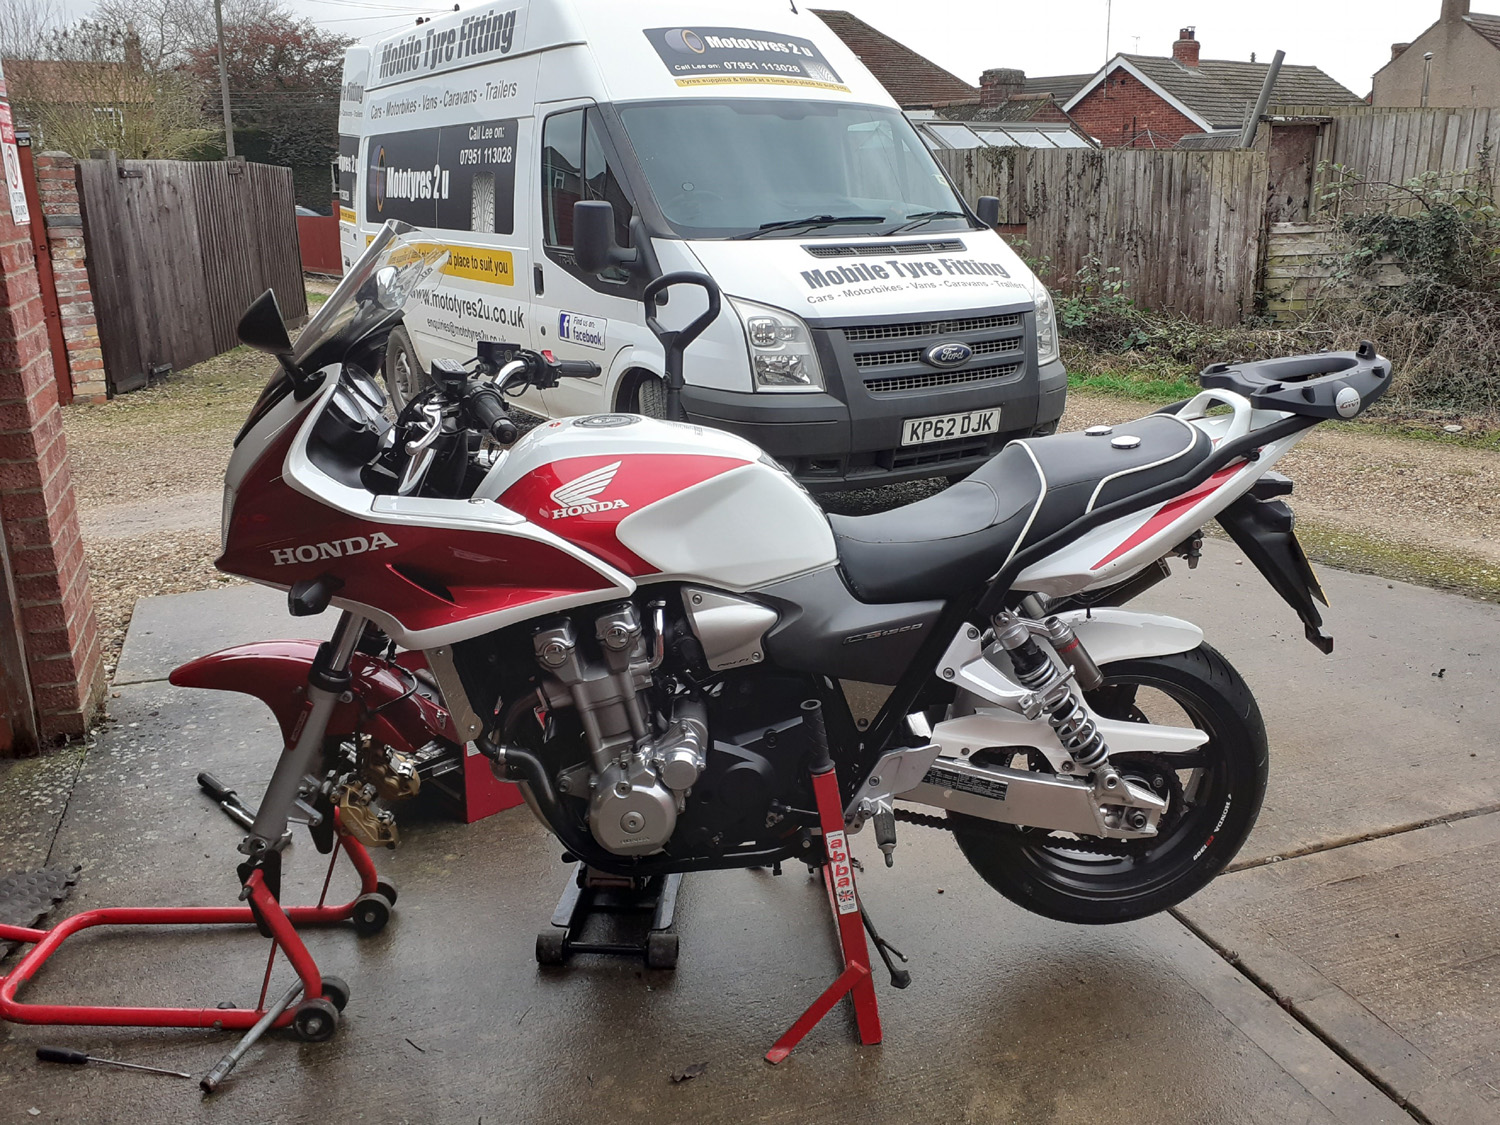 Mototyres 2 u Mobile Tyre fitting Lincolnshire Holbeach Tyres Honda Cb1300 motorbike having 2 Michelin pilot road 4 fitted